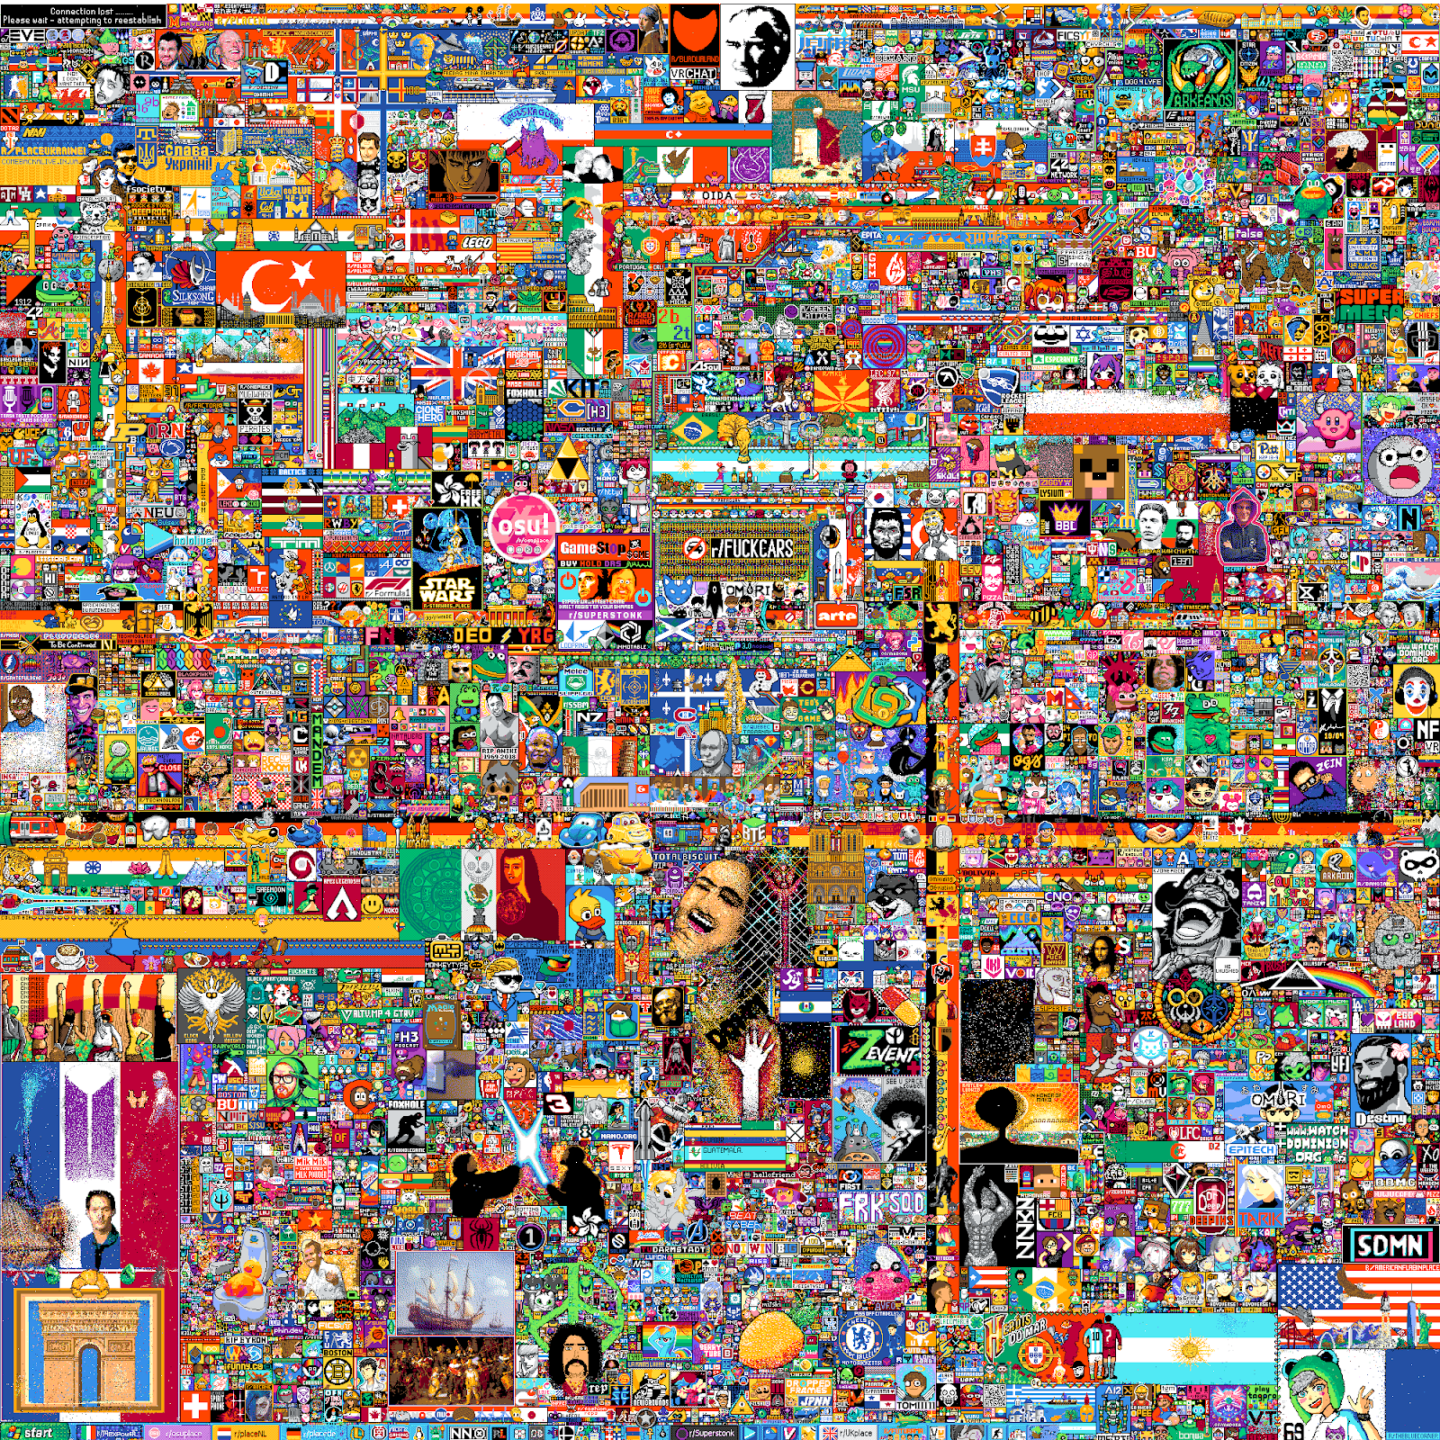 A screenshot of what the r/Place canvas looked like before it was erased.